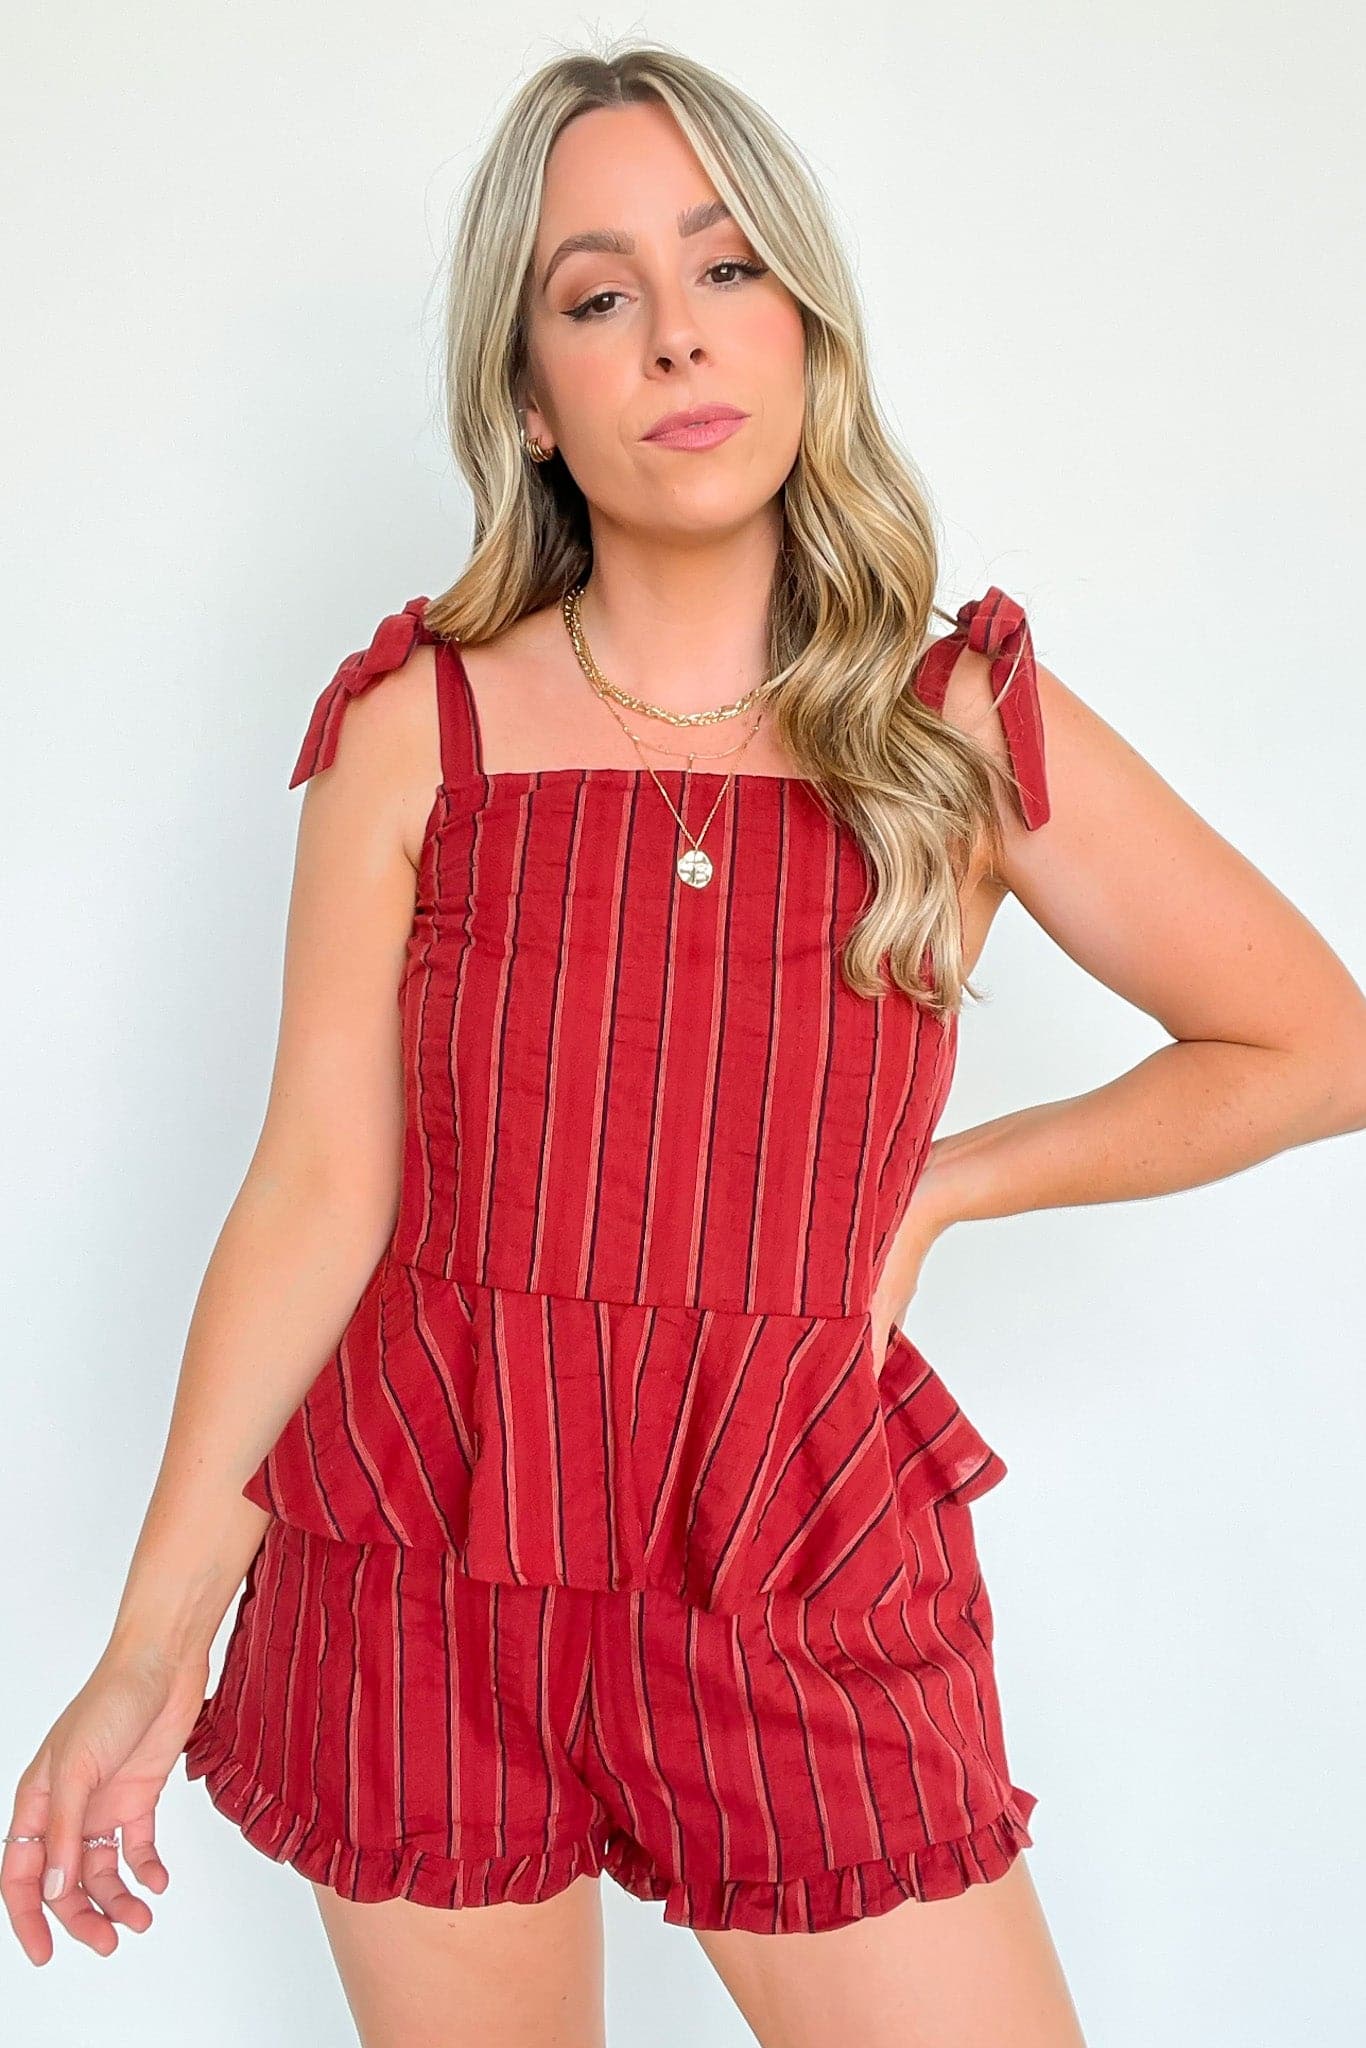  Sail West Tie Strap Peplum Striped Tank Top - FINAL SALE - Madison and Mallory